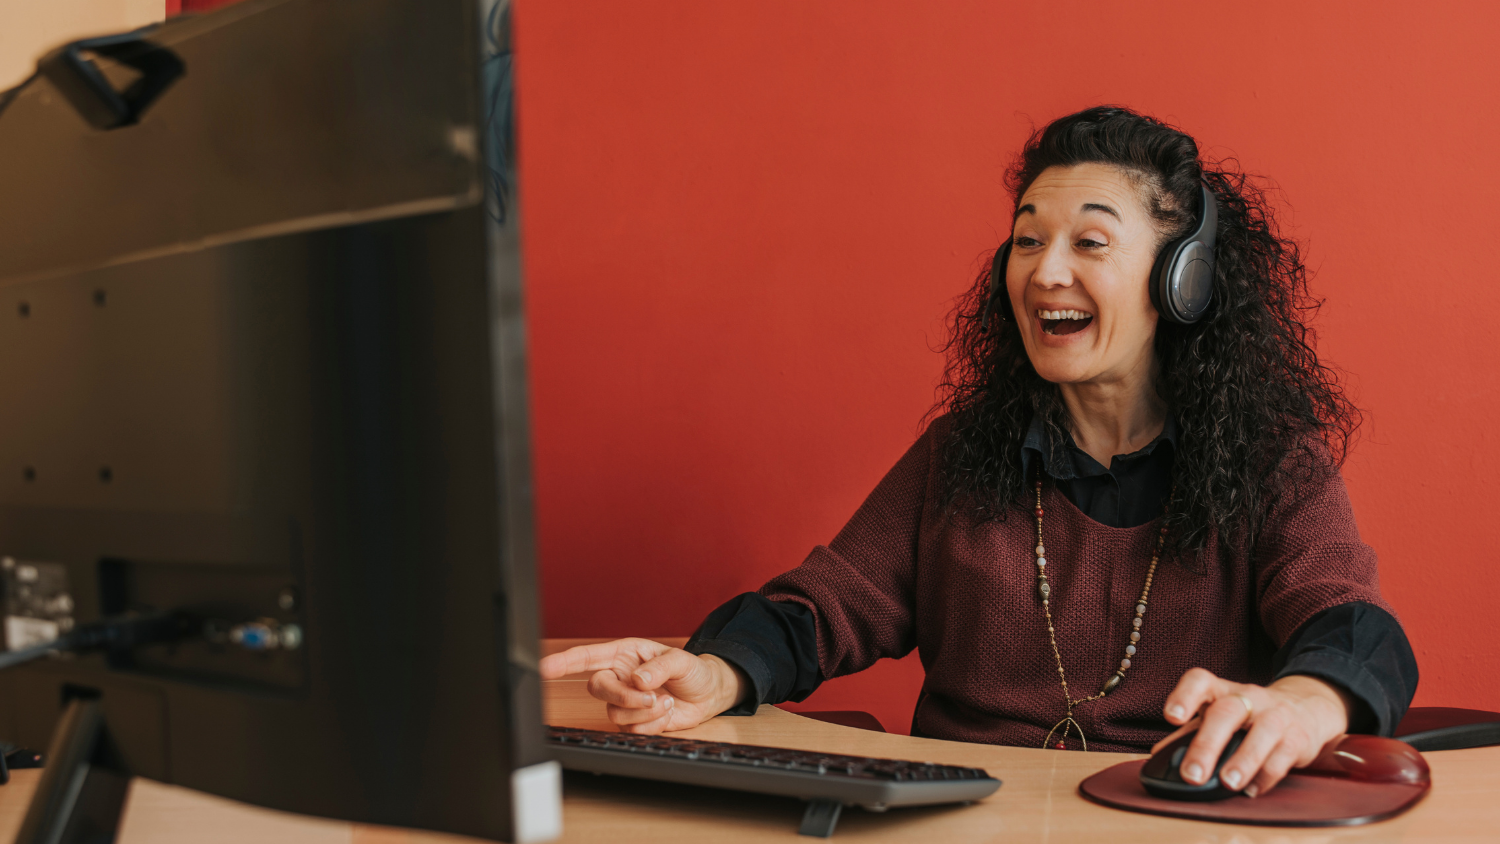 Woman sits in front of computer screen at desk and smiles/laughs.